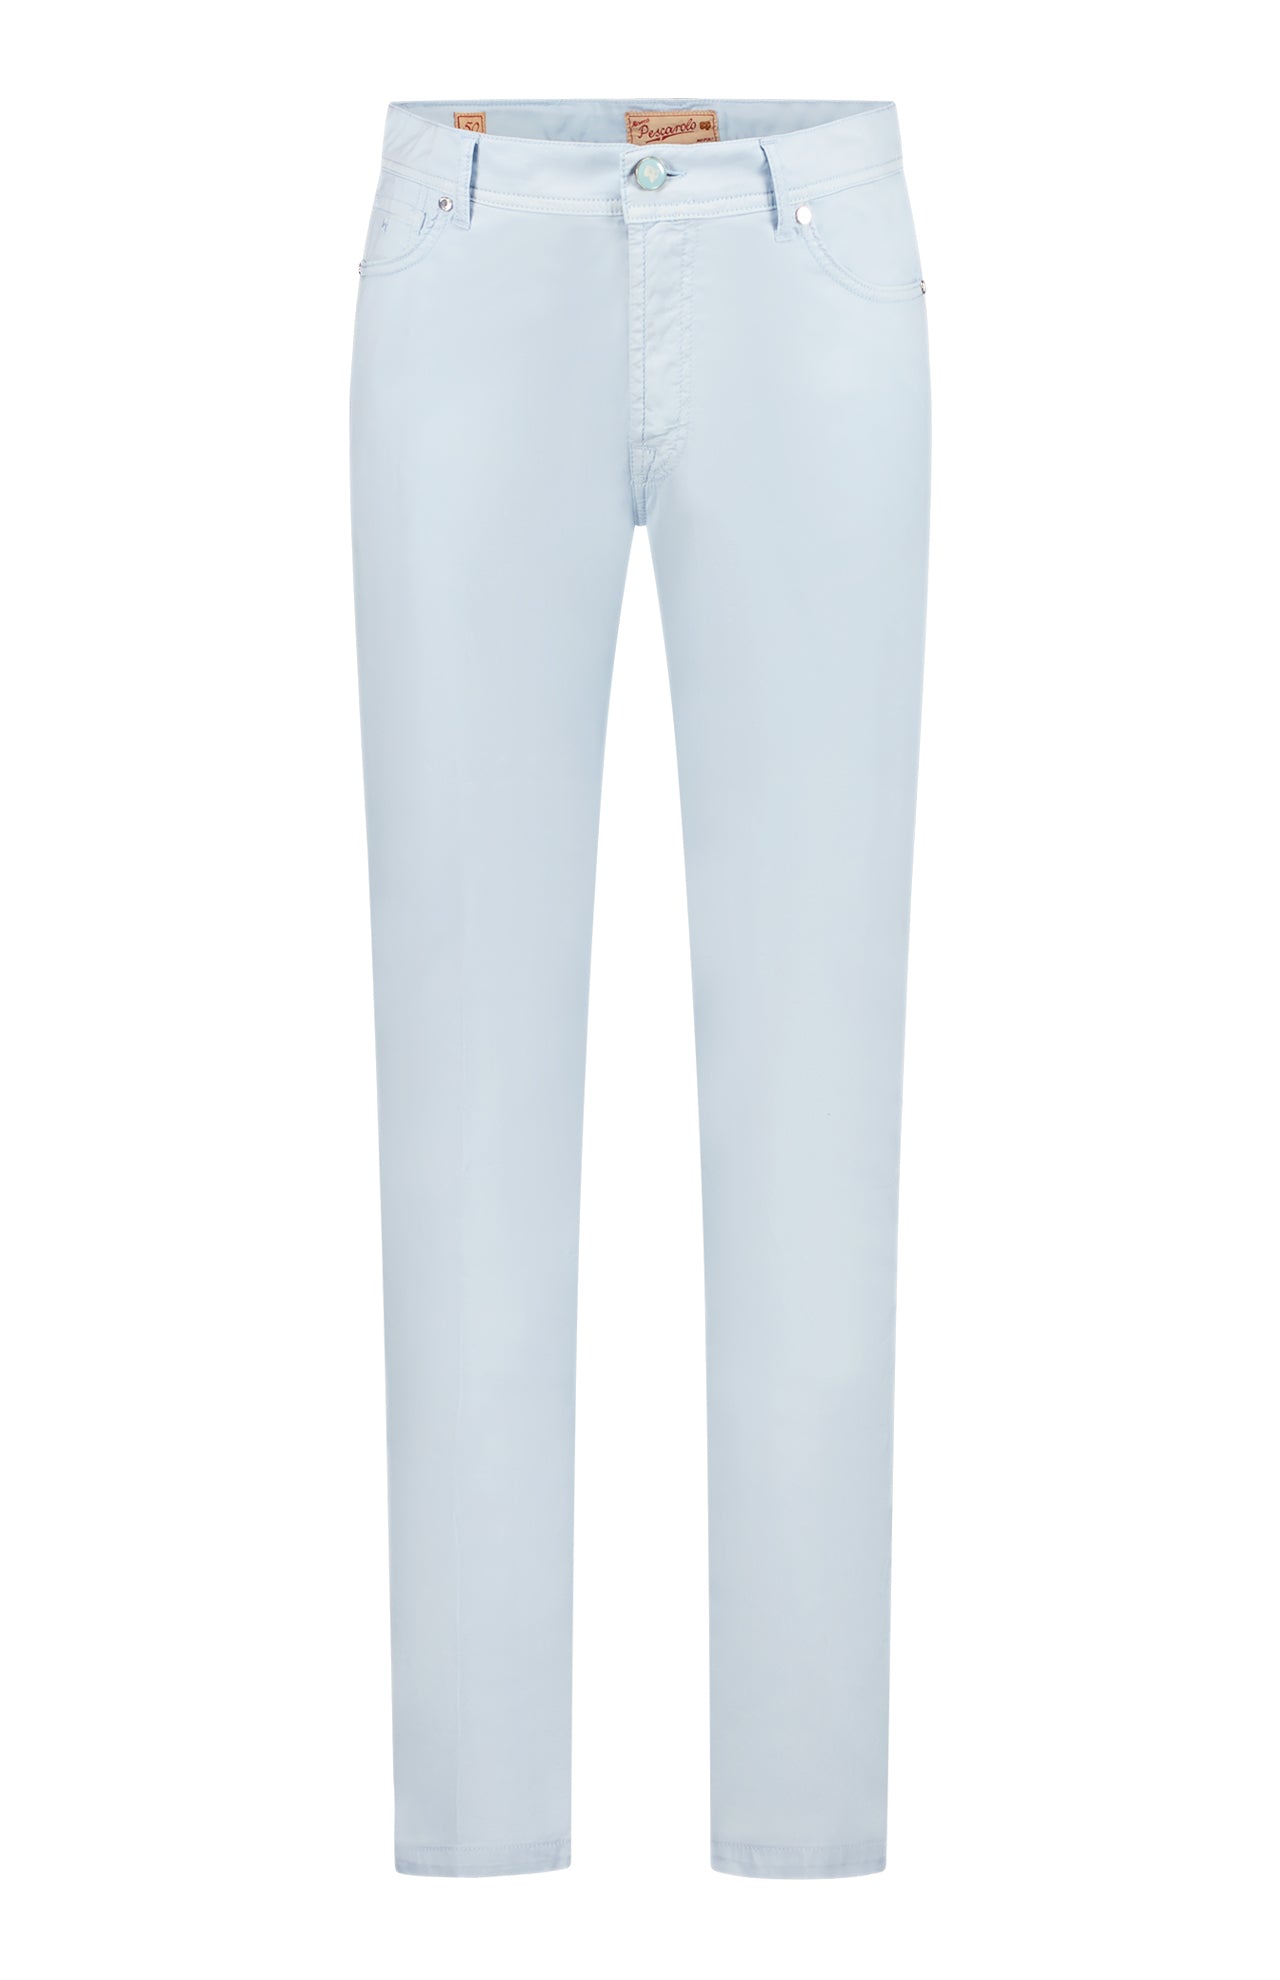 Trousers (7332027105395)